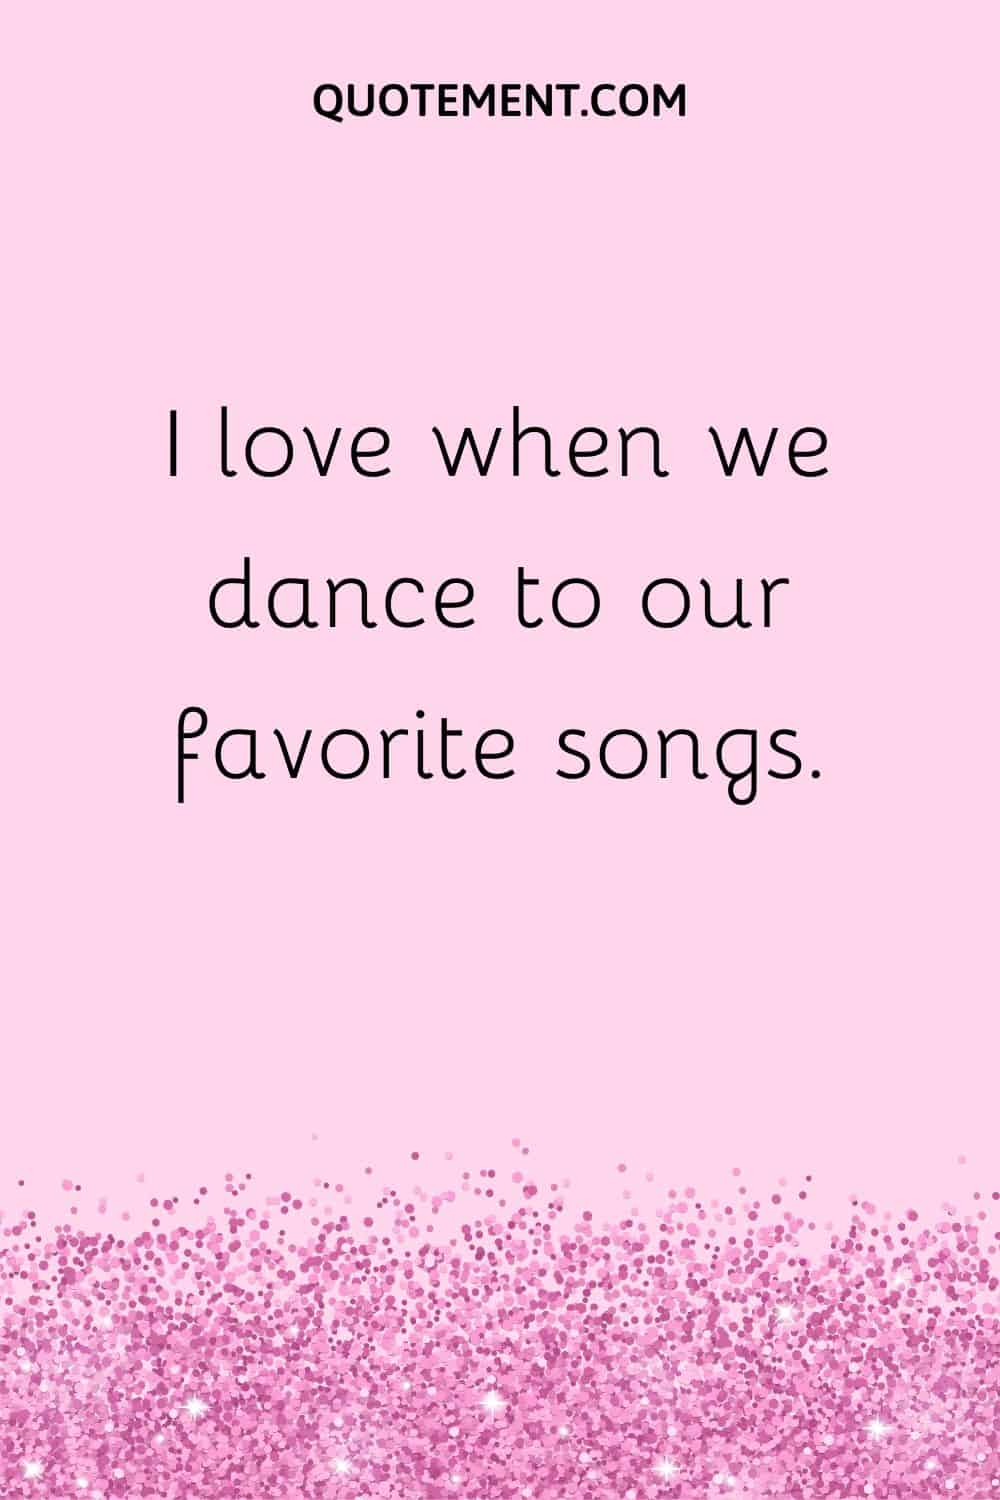 I love when we dance to our favorite songs